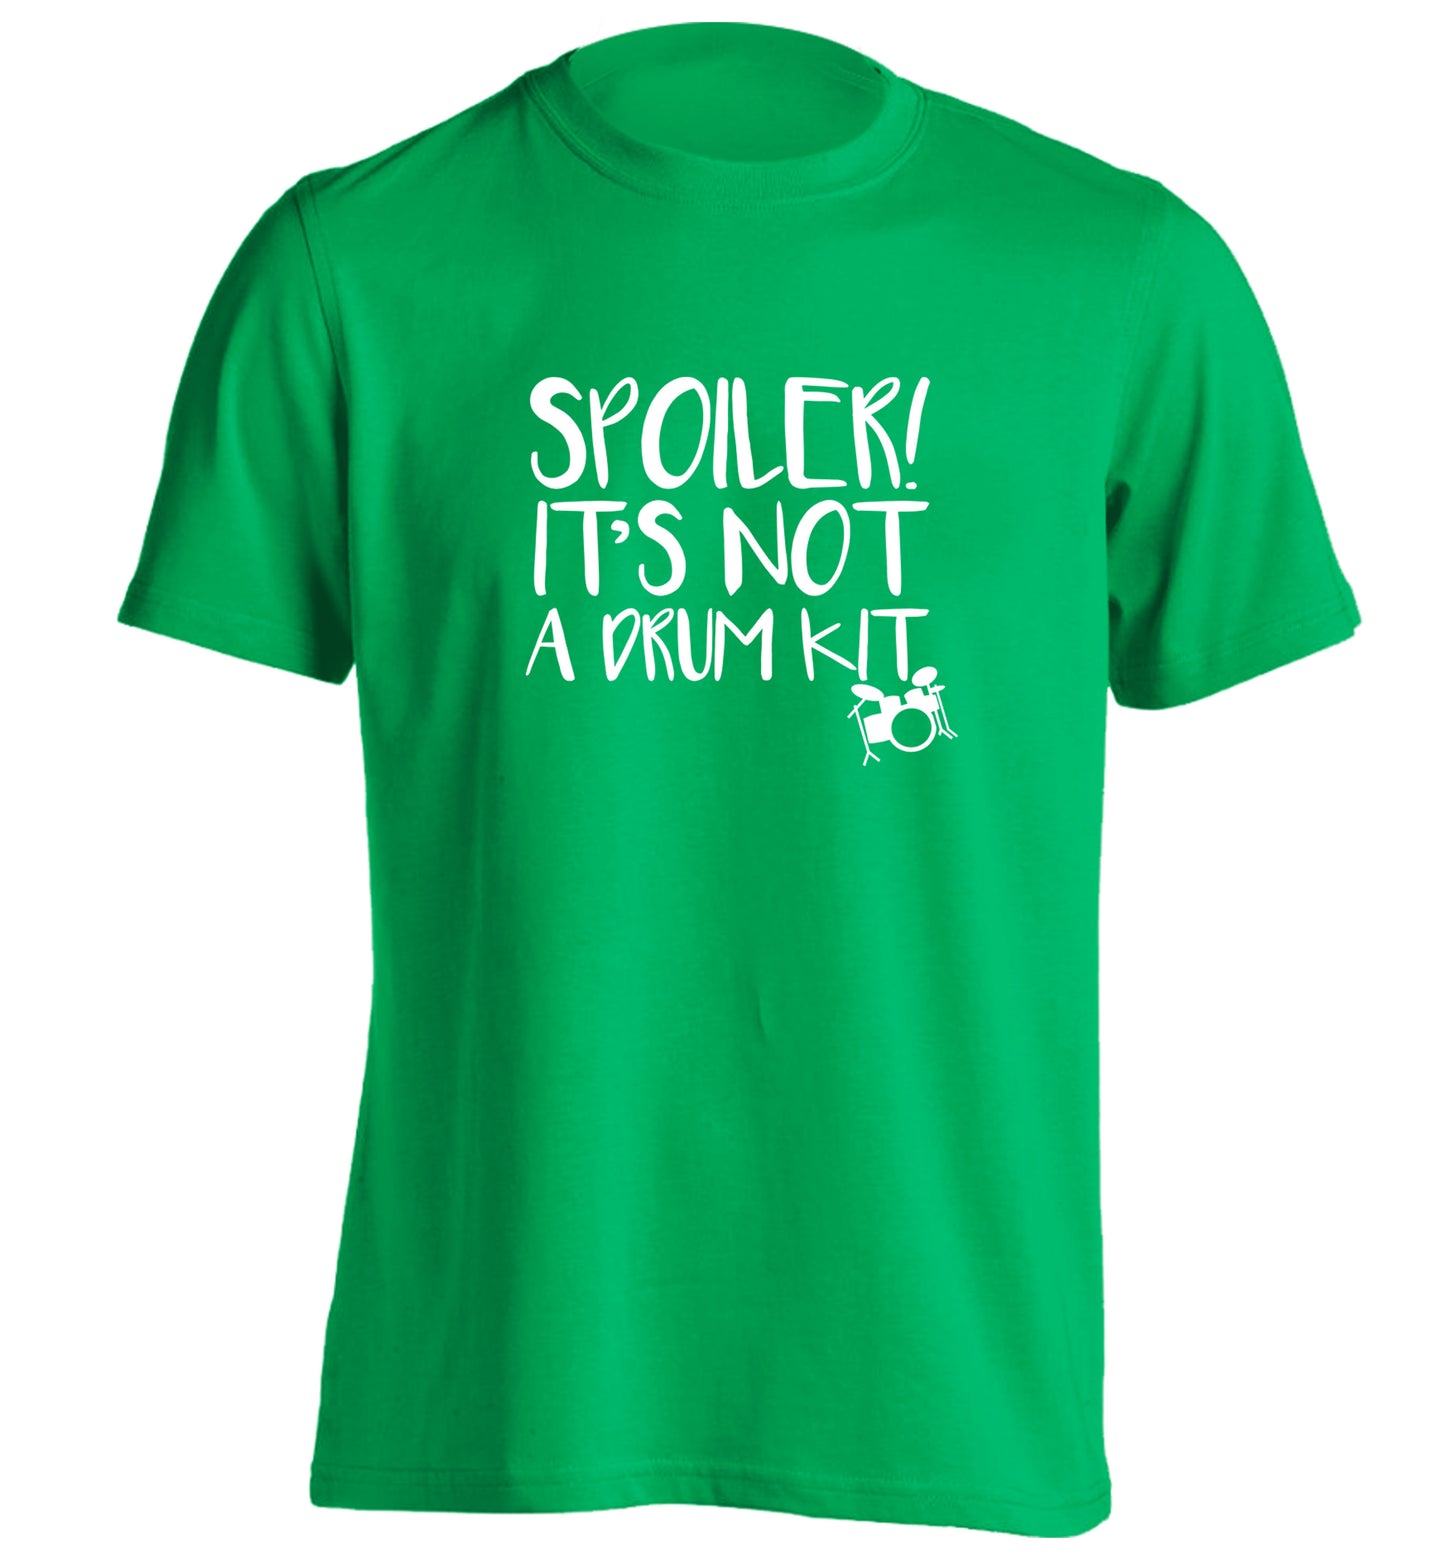 Spoiler it's not a drum kit adults unisex green Tshirt 2XL